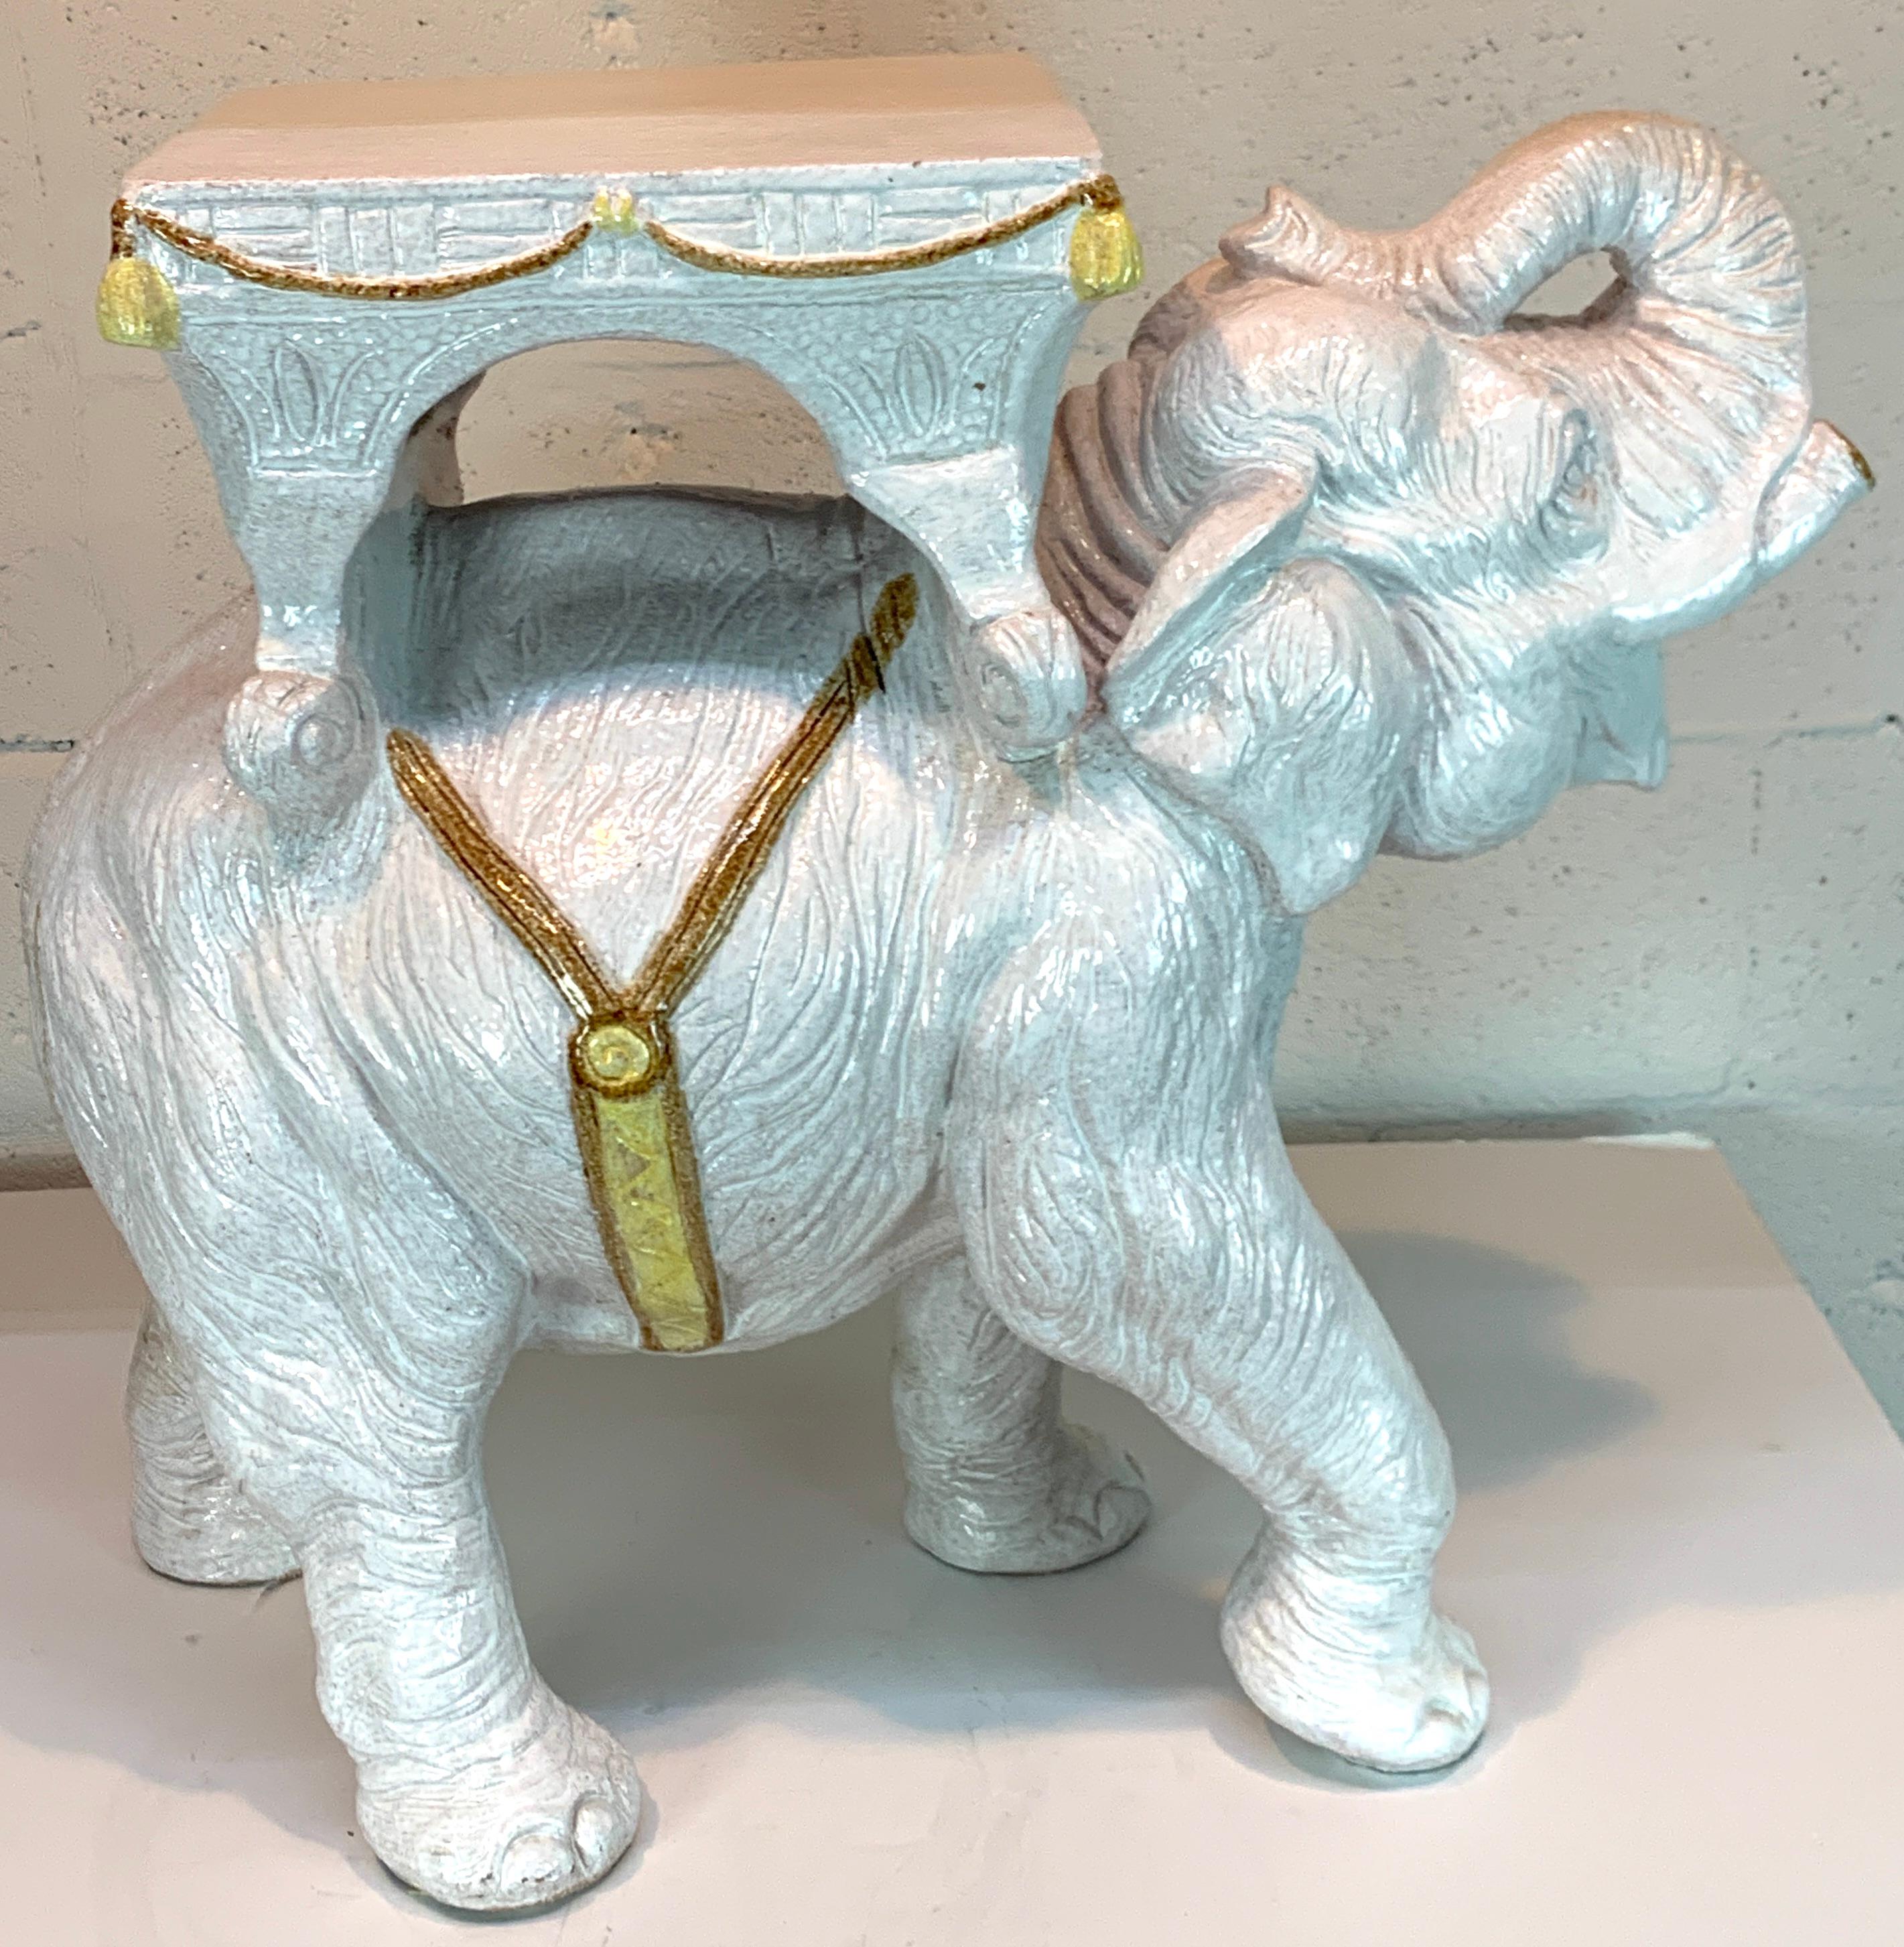 Exceptional Hollywood Regency white parade elephant garden side table, Italy
Highly detailed, with trimmed tusks, and raised right foot and trunk upwards, fitted with a 10” x 11